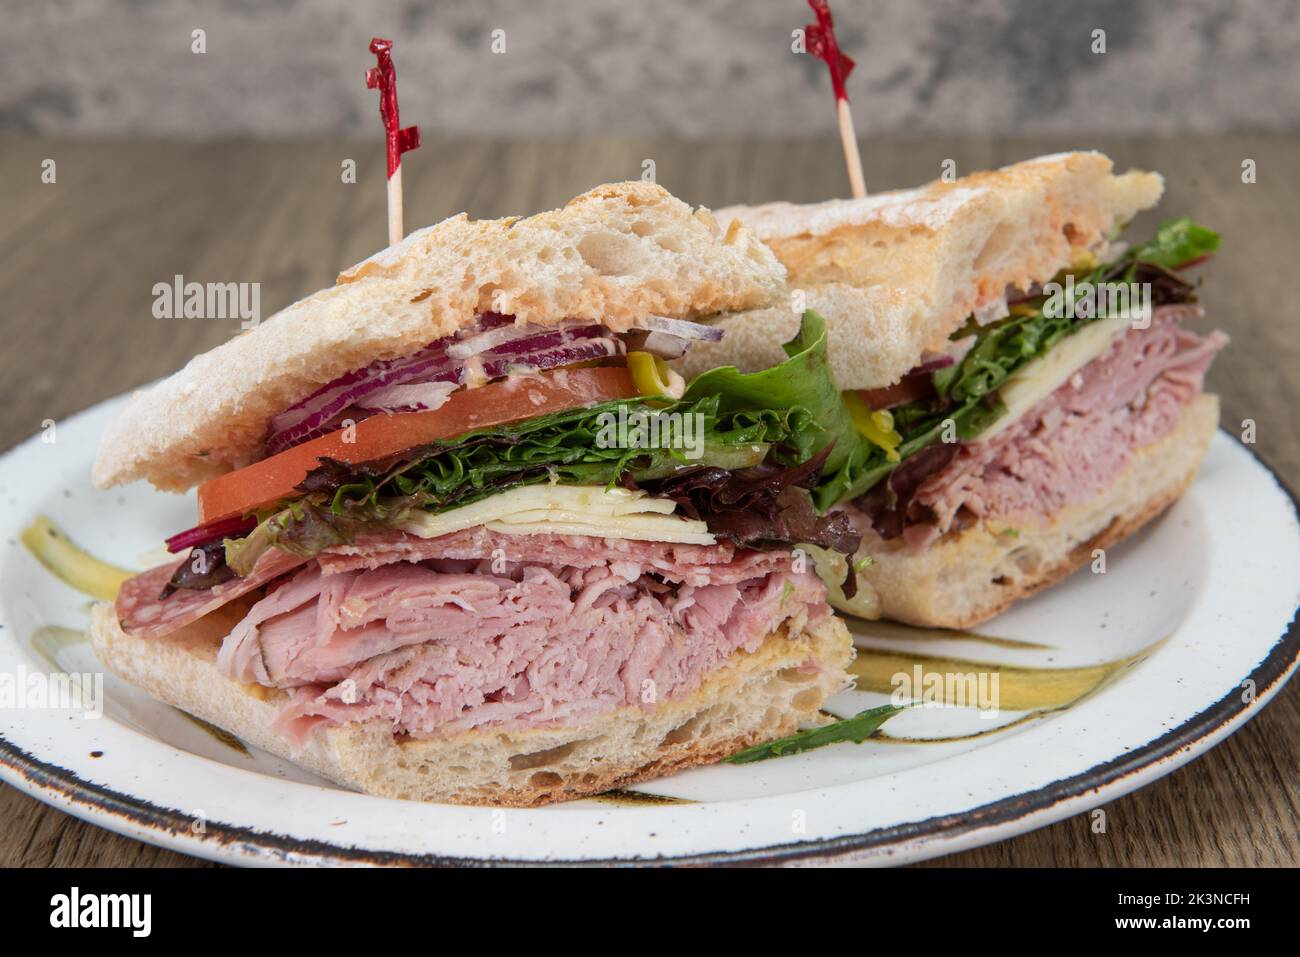 Loaded Italian sub sandwich is thick with ham, cheese, pepperoni, tomato, and onion on a freshly baked roll. Stock Photo